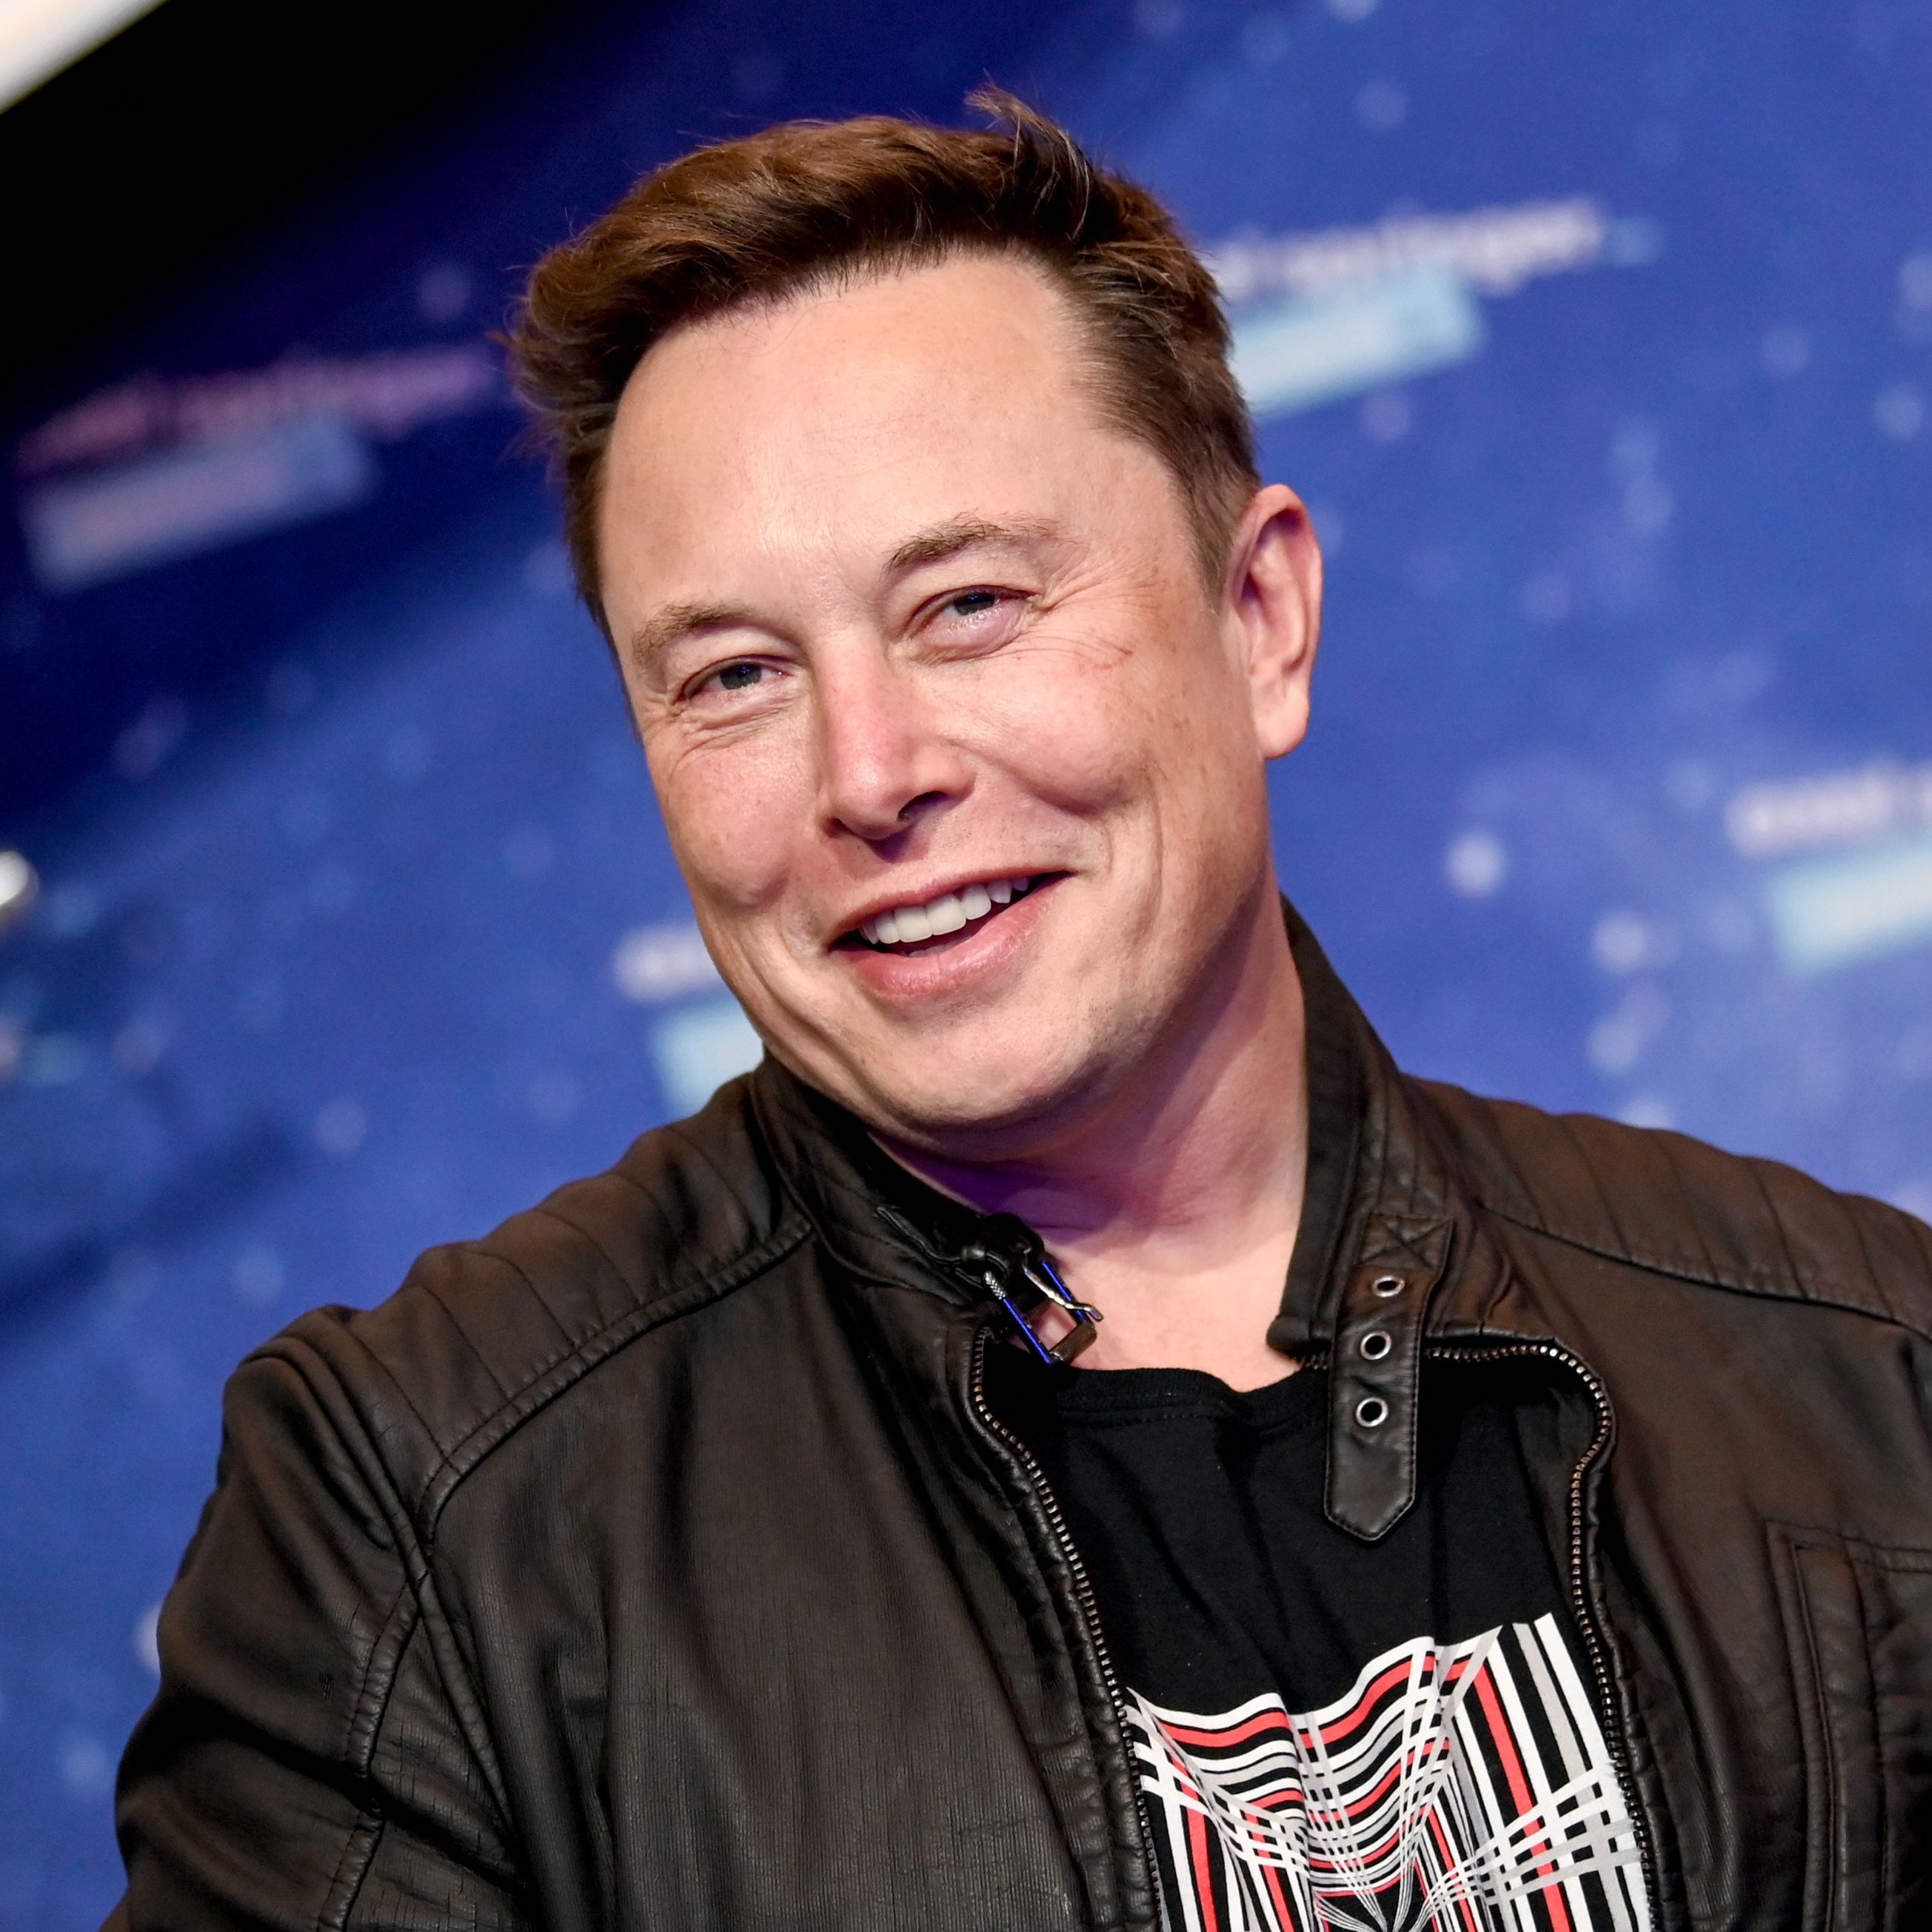 Elon Musk the Twitter celebrity is not the same as Musk the SpaceX